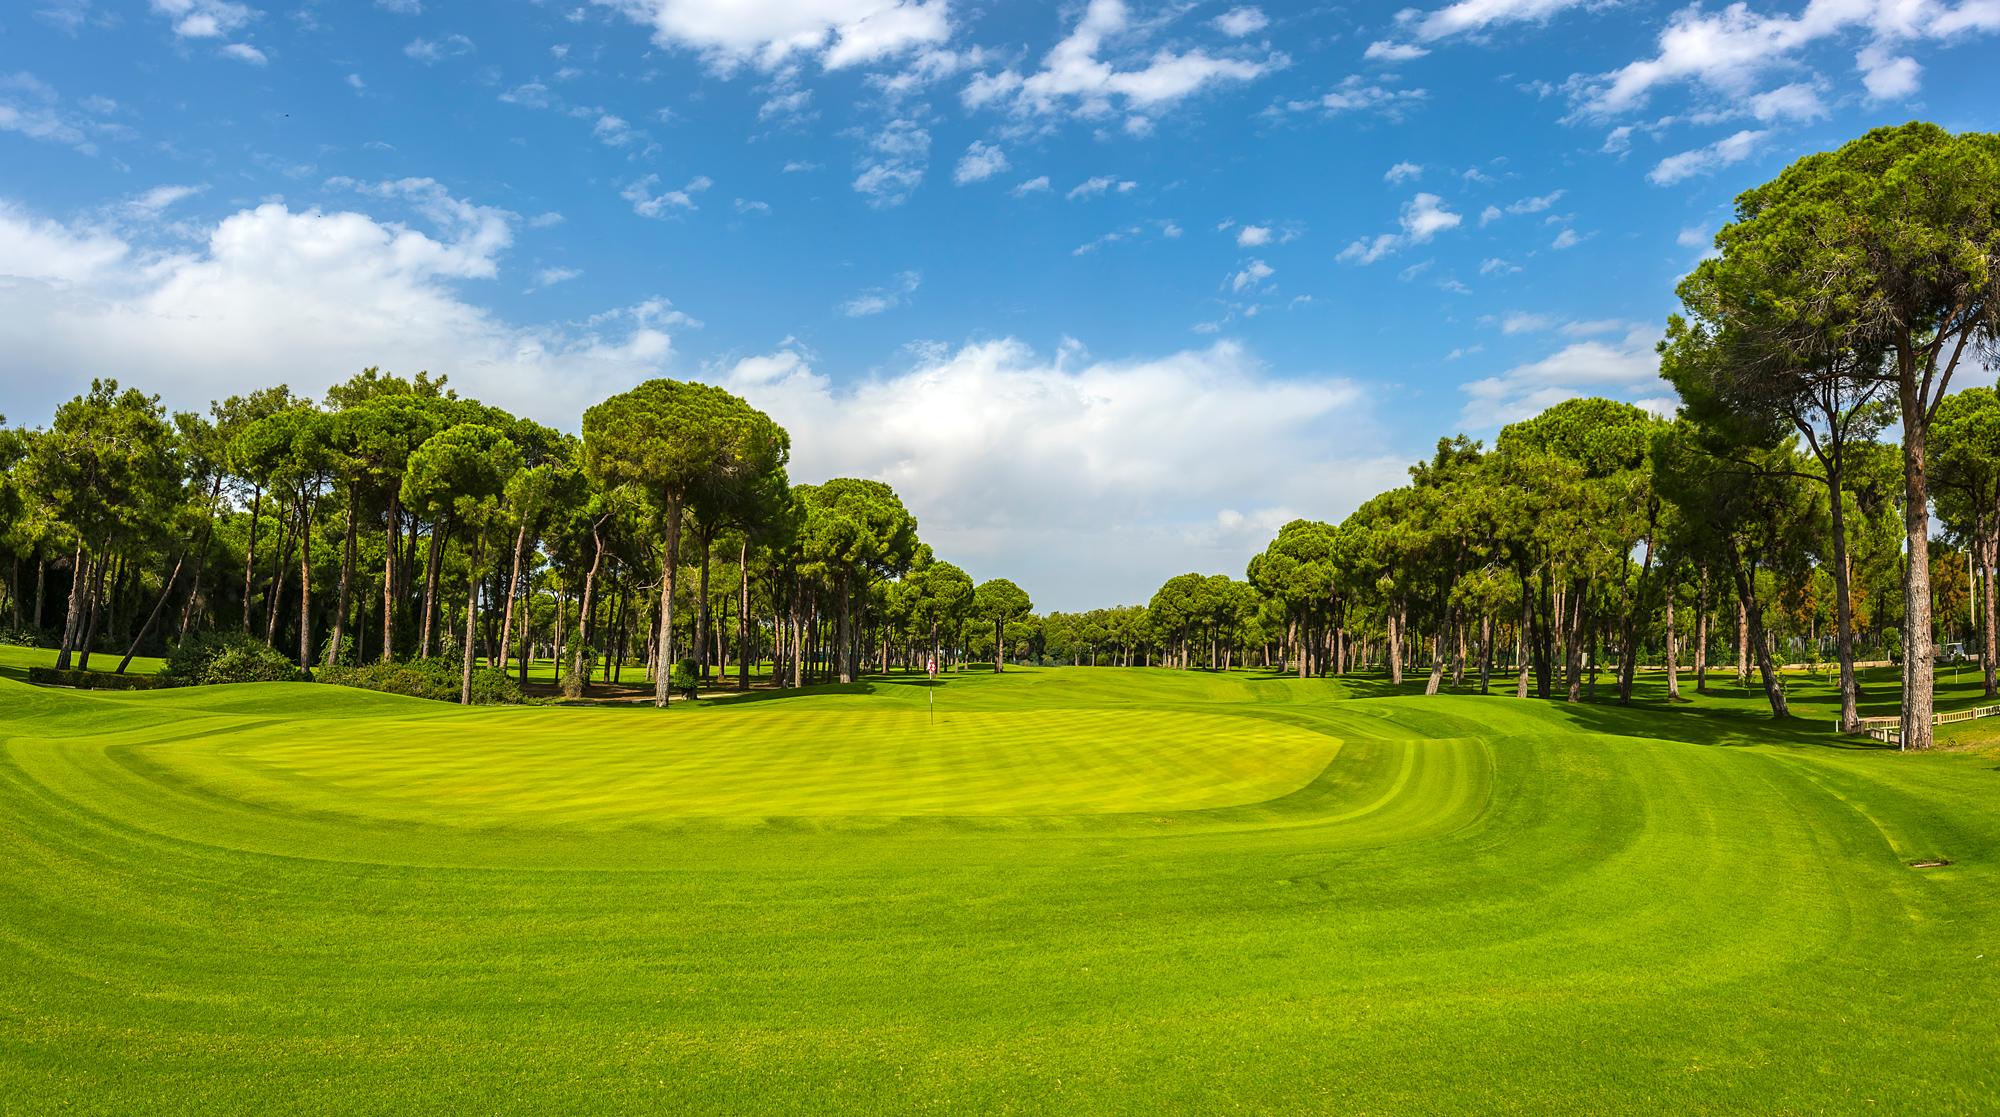 The Gloria New Golf Course's lovely golf course situated in brilliant Belek.